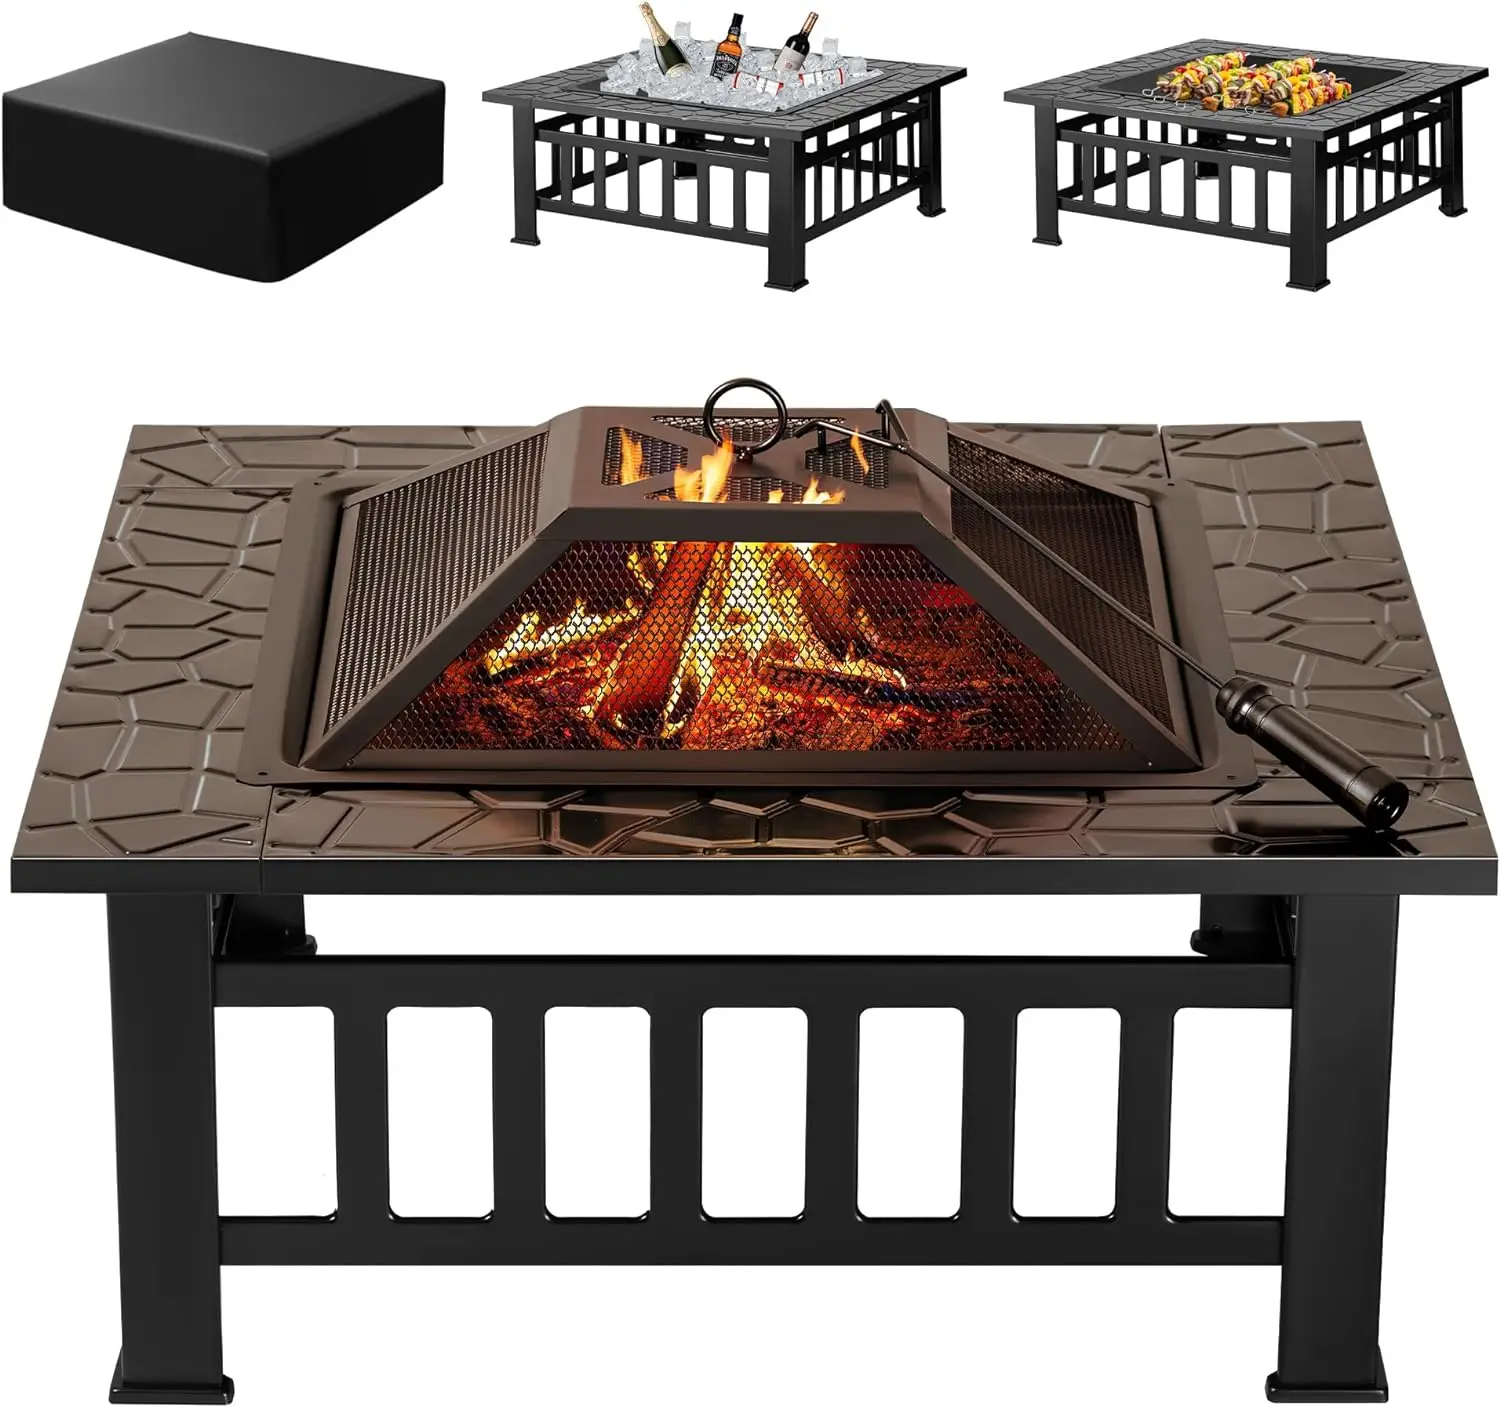 32 inch Metal Outdoor Fire Pit Table Multiuse Square Patio BBQ Firepit with Spark Screen Lid and Waterproof Cover for Camping